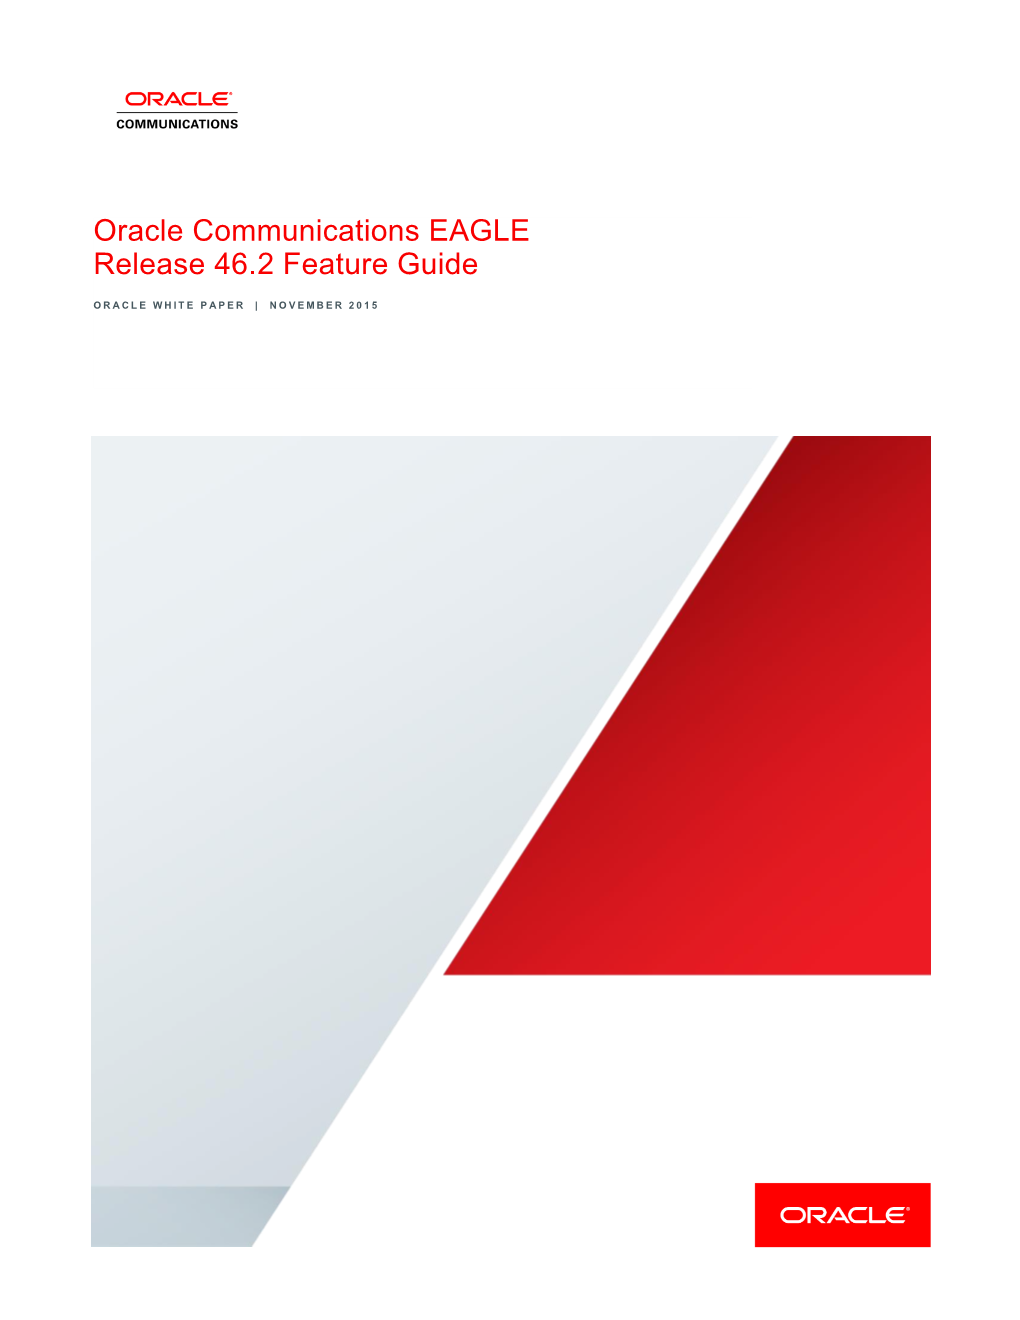 White Paper Oracle Communications EAGLE 46.2 Feature Guide November 2015